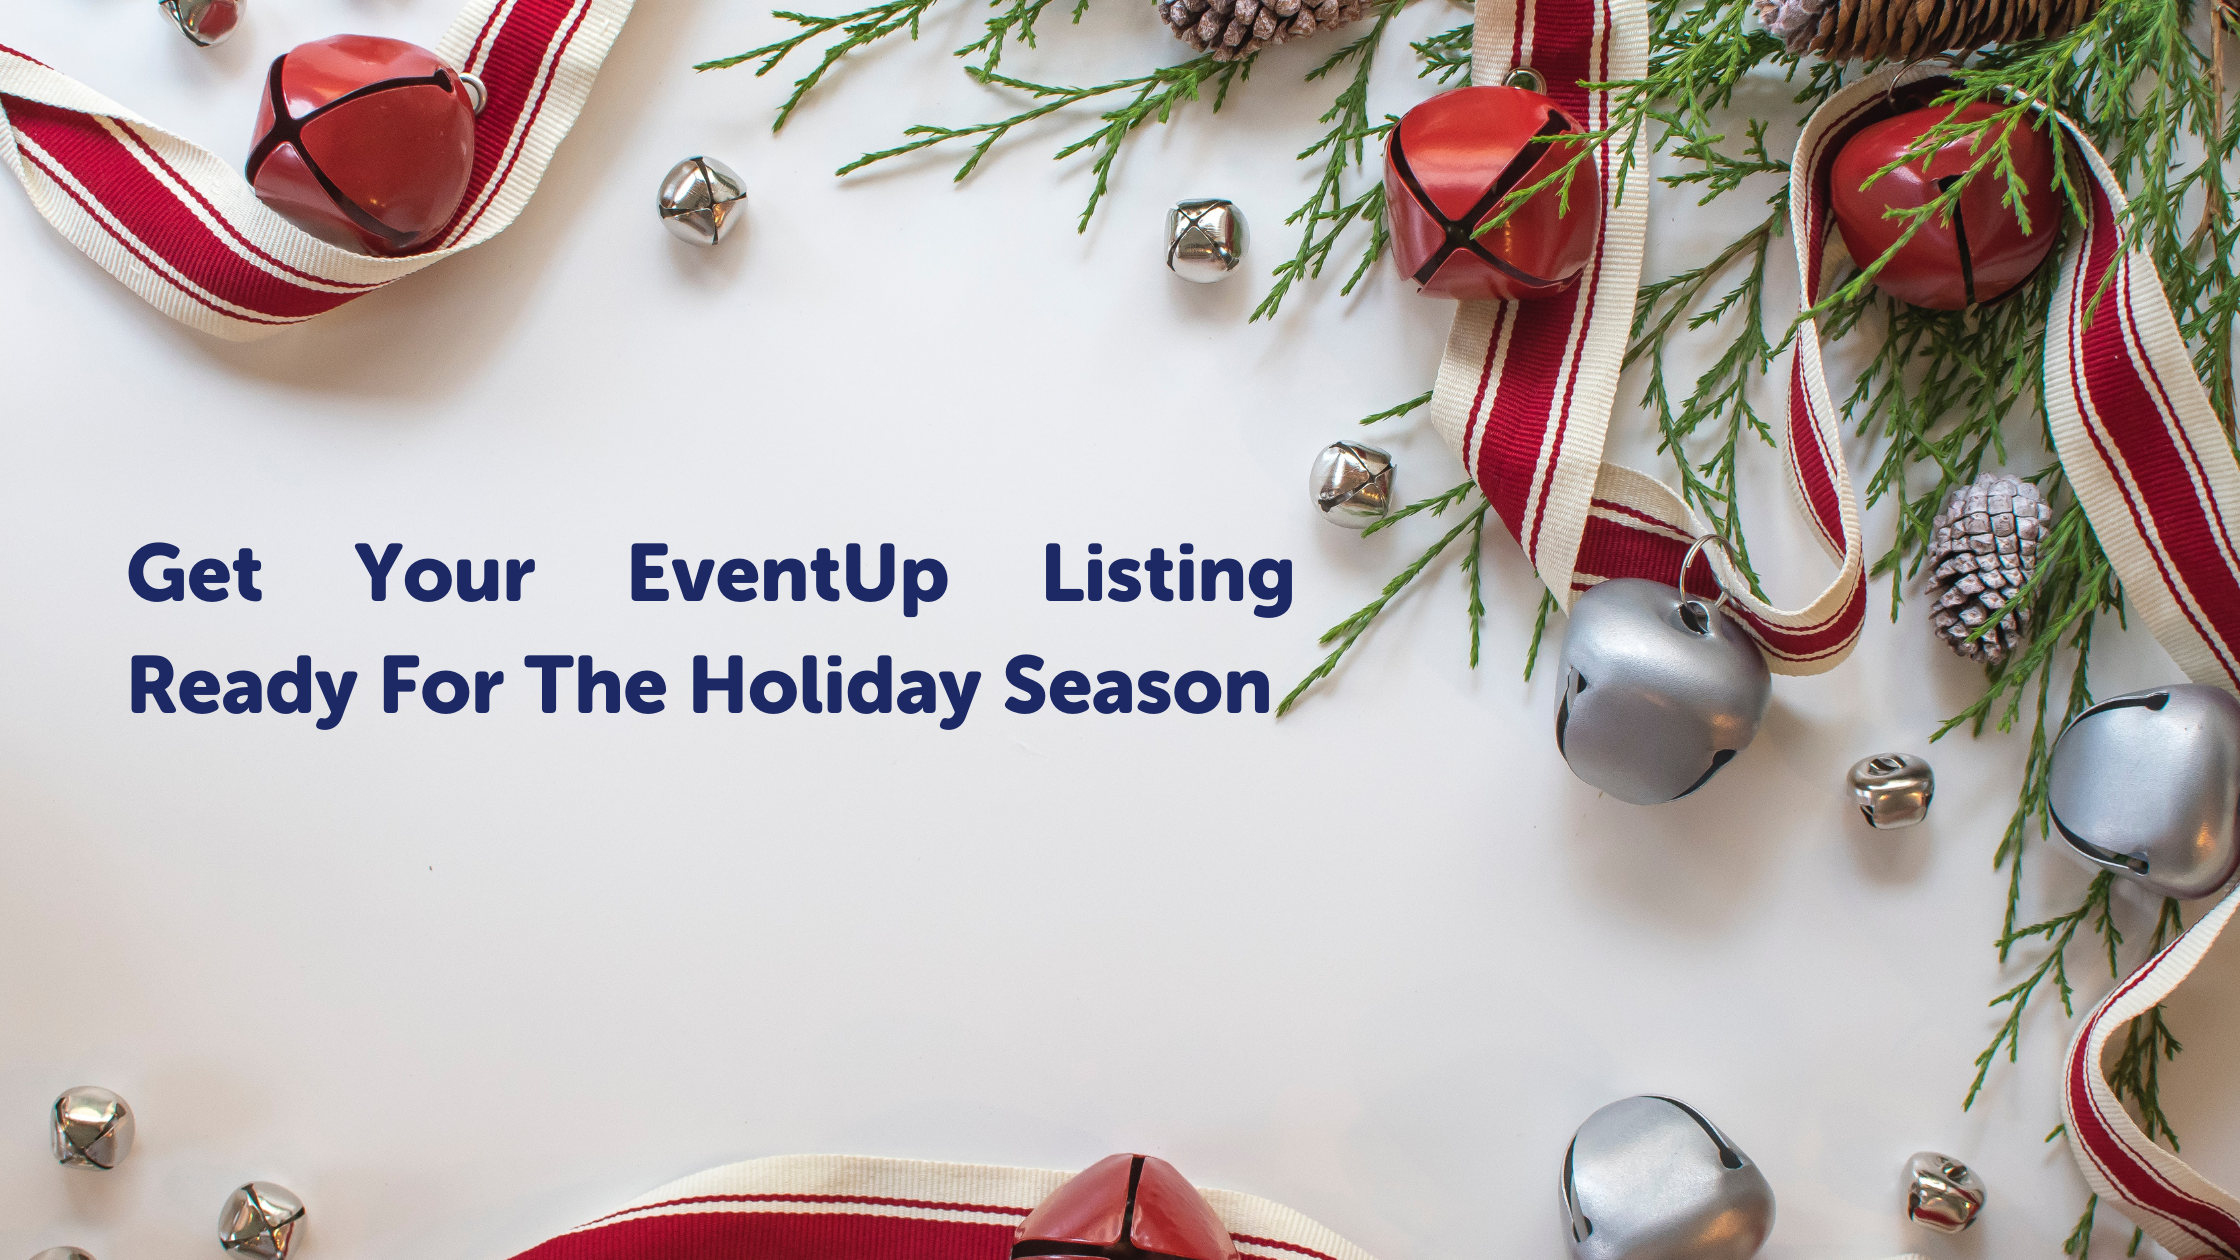 Get Your EventUp Listing Ready For The Holiday Season